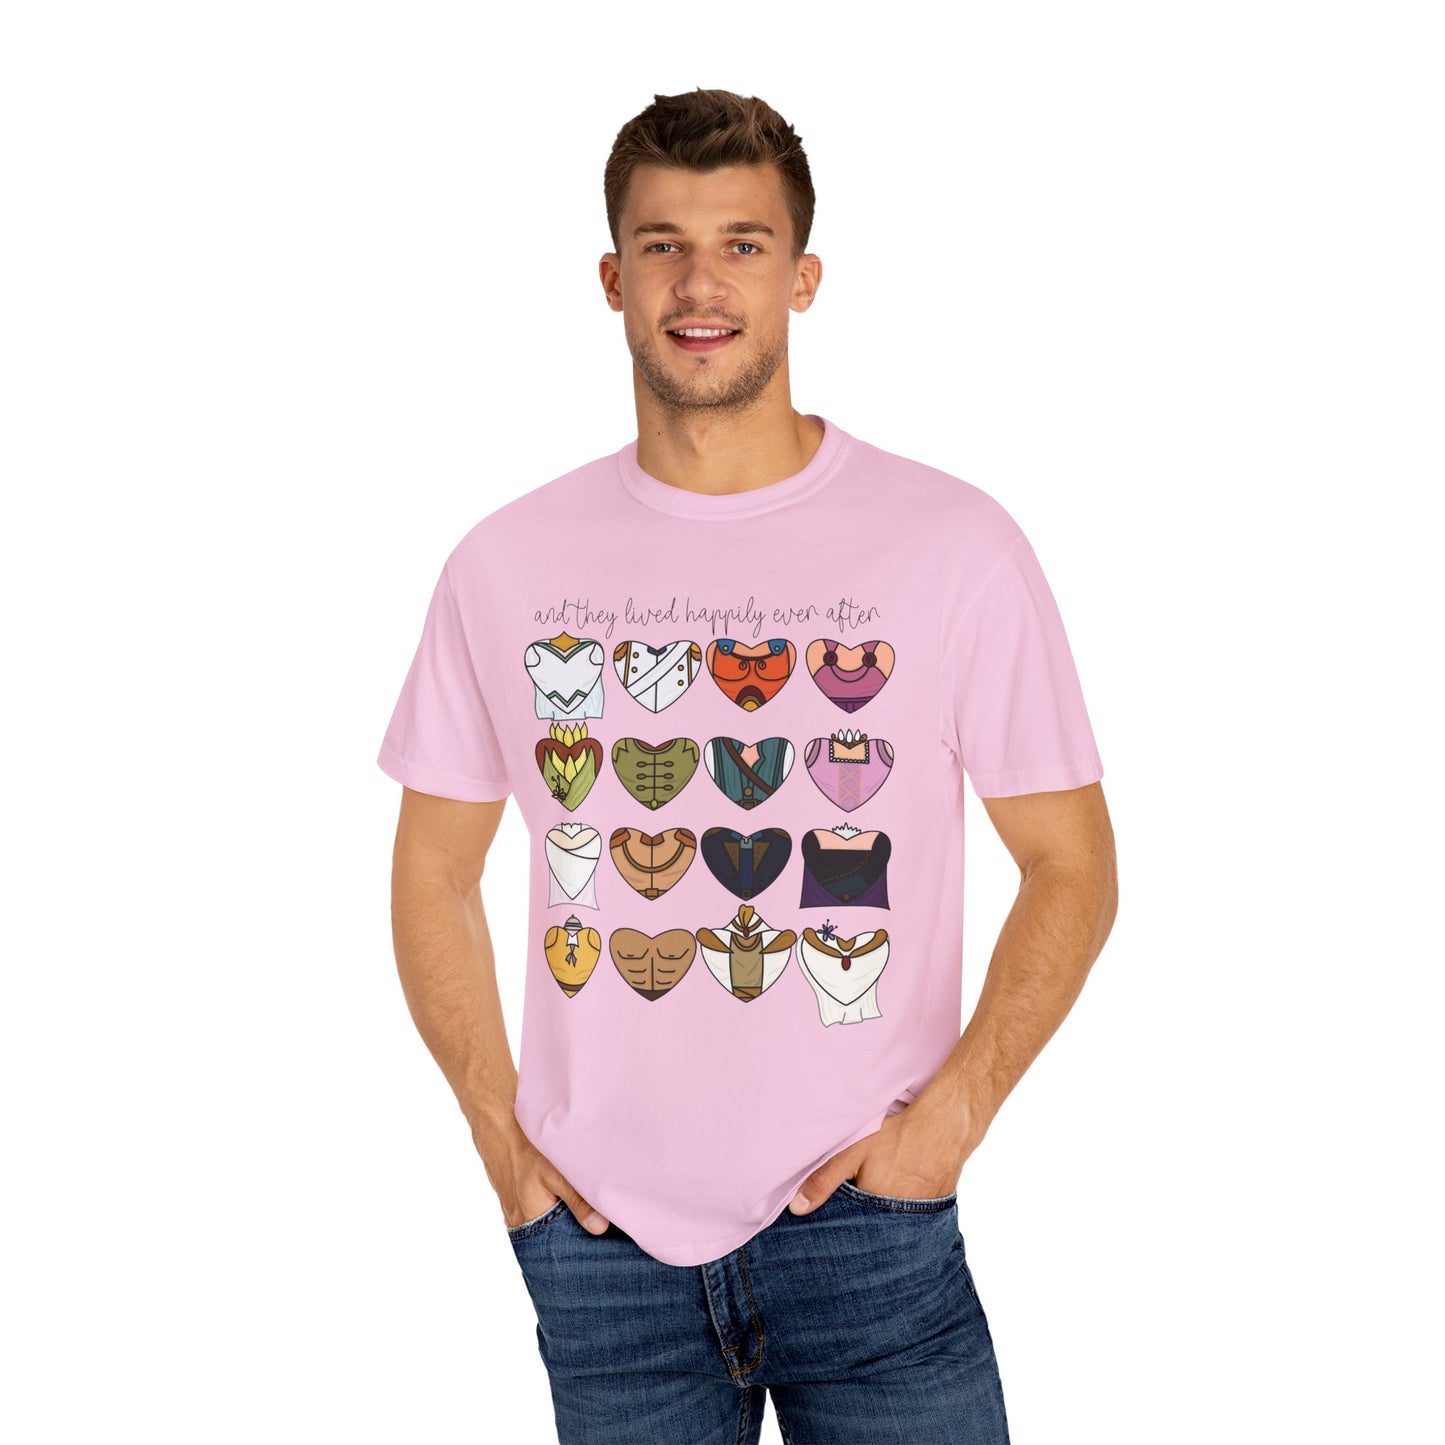 Adult Sweetheart Couples / Happily Ever After Tee